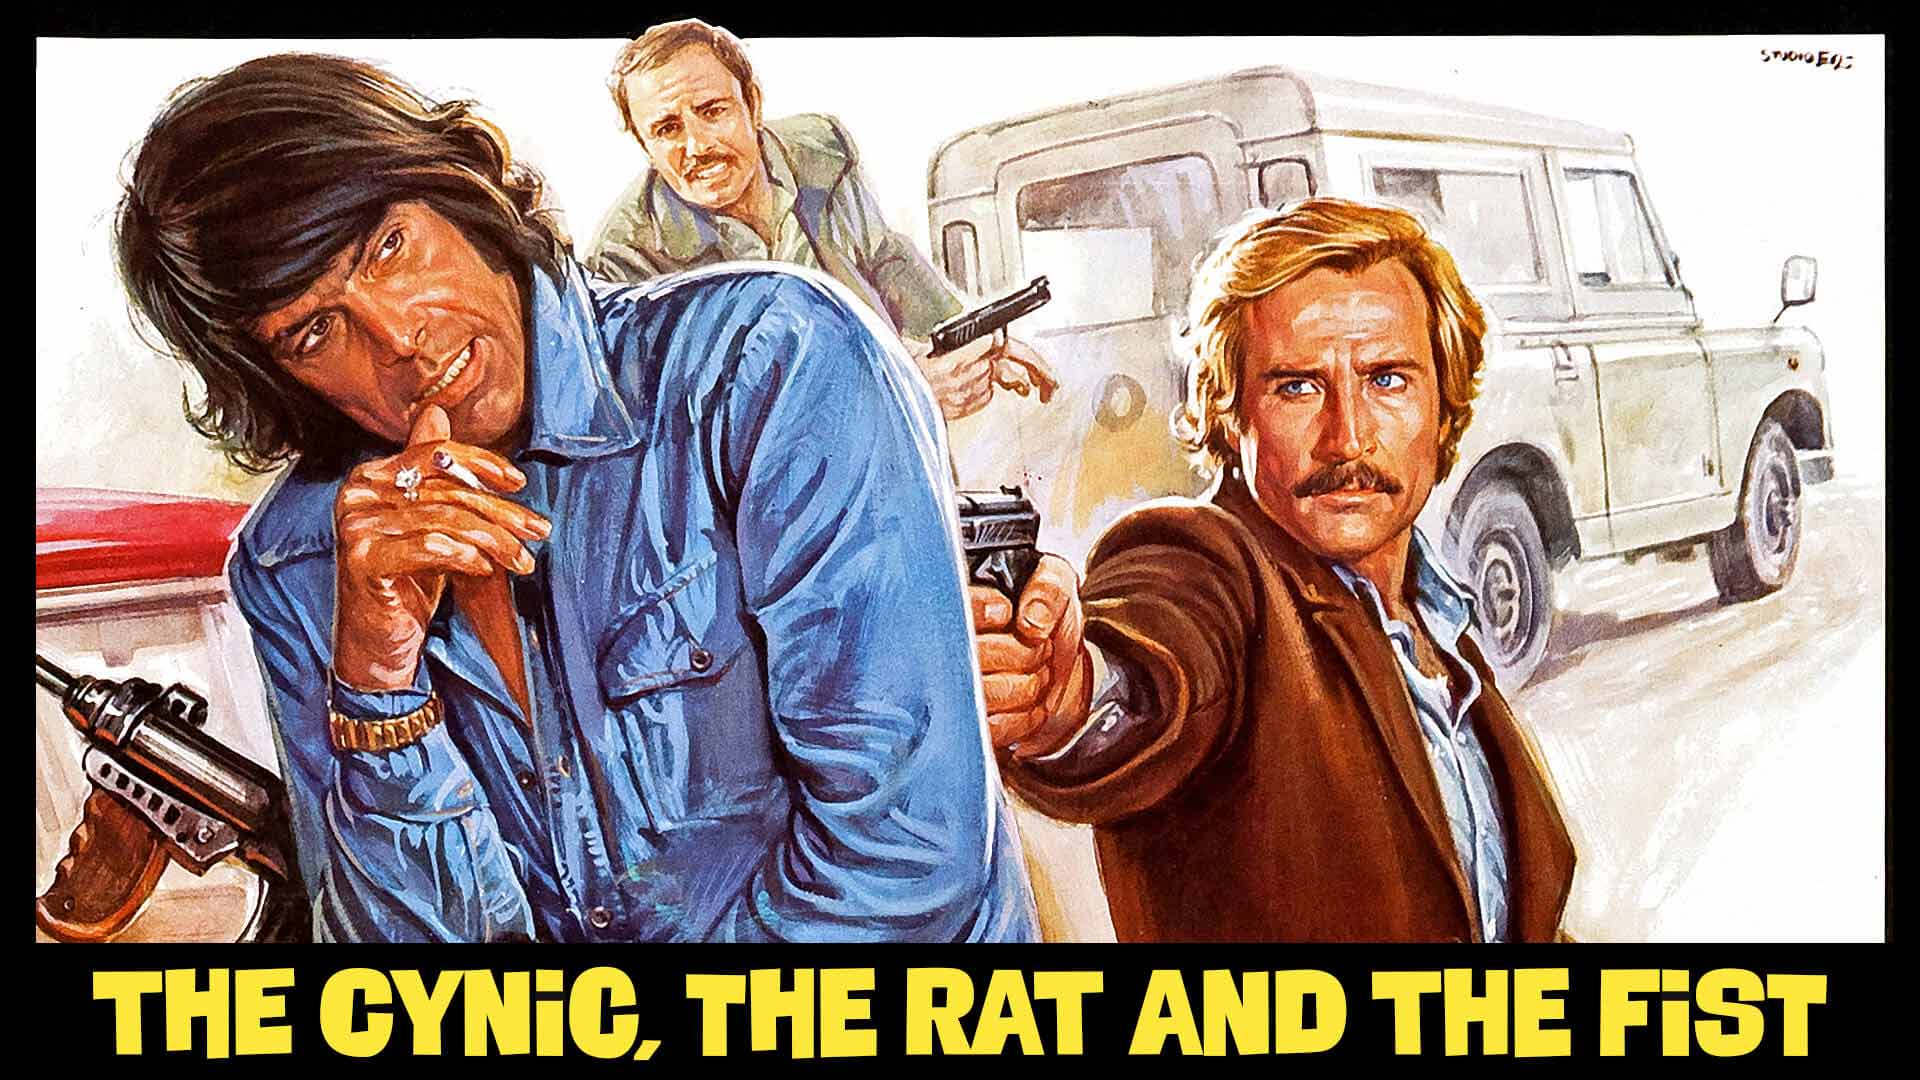 The Cynic The Rat and The Fist